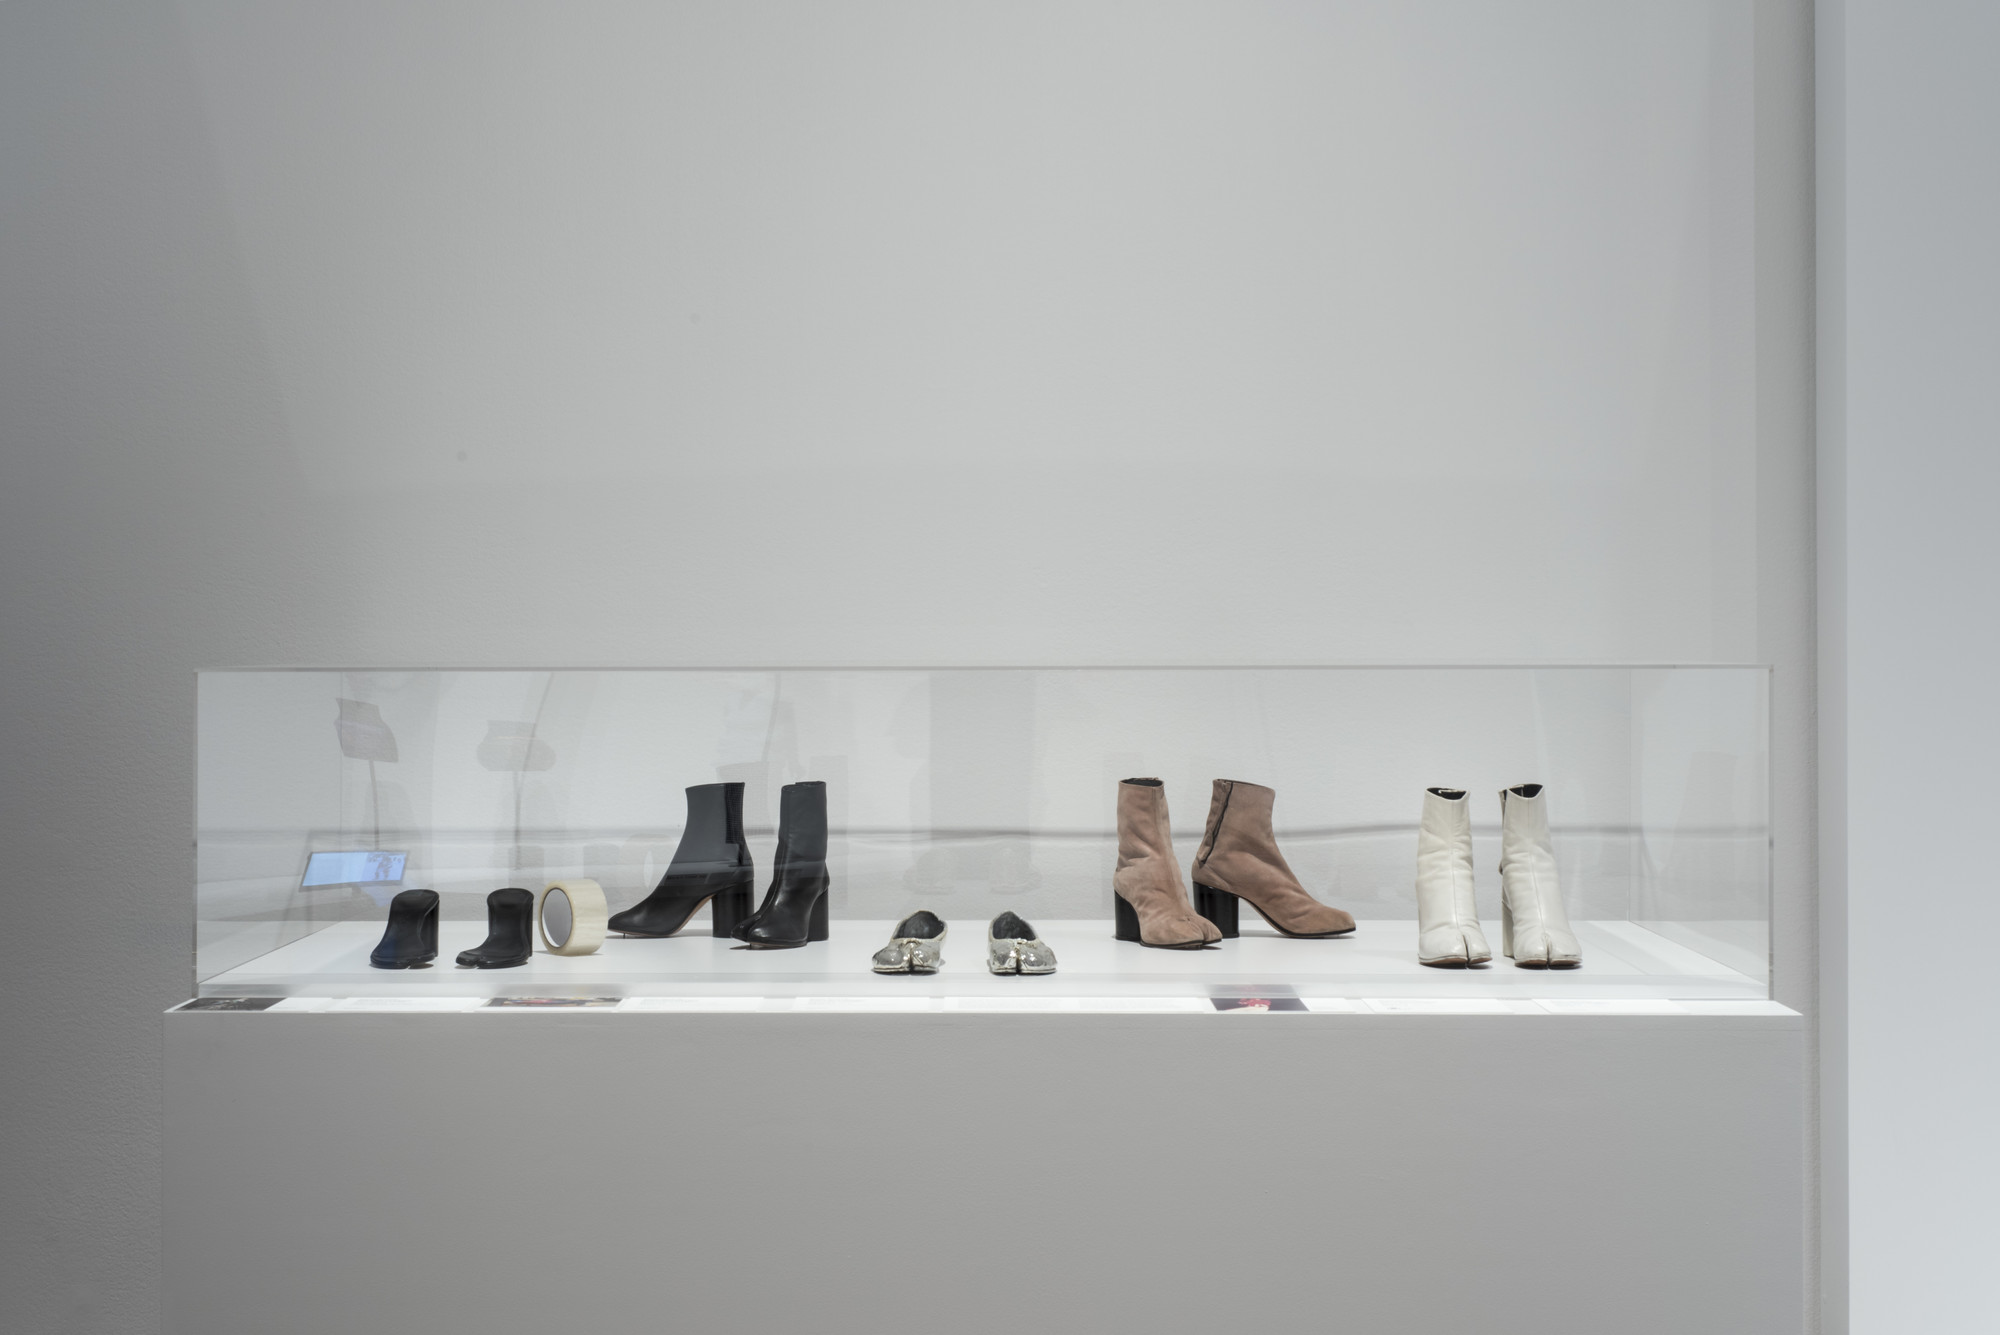 Martin Margiela (Belgian, born 1957). Maison Martin Margiela (later Maison Margiela) (France, founded 1988). Boots. 1990–99. Leather. Sandals. Spring/summer 1996. Leather and adhesive tape. Boots. Spring/summer 1989. Suede. Shoes. 2008. Leather. Fashion Museum, Province of Antwerp. Boots. c. 1990. Leather. Lent by Linda Loppa. Image taken during installation of _Items: Is Fashion Modern?_